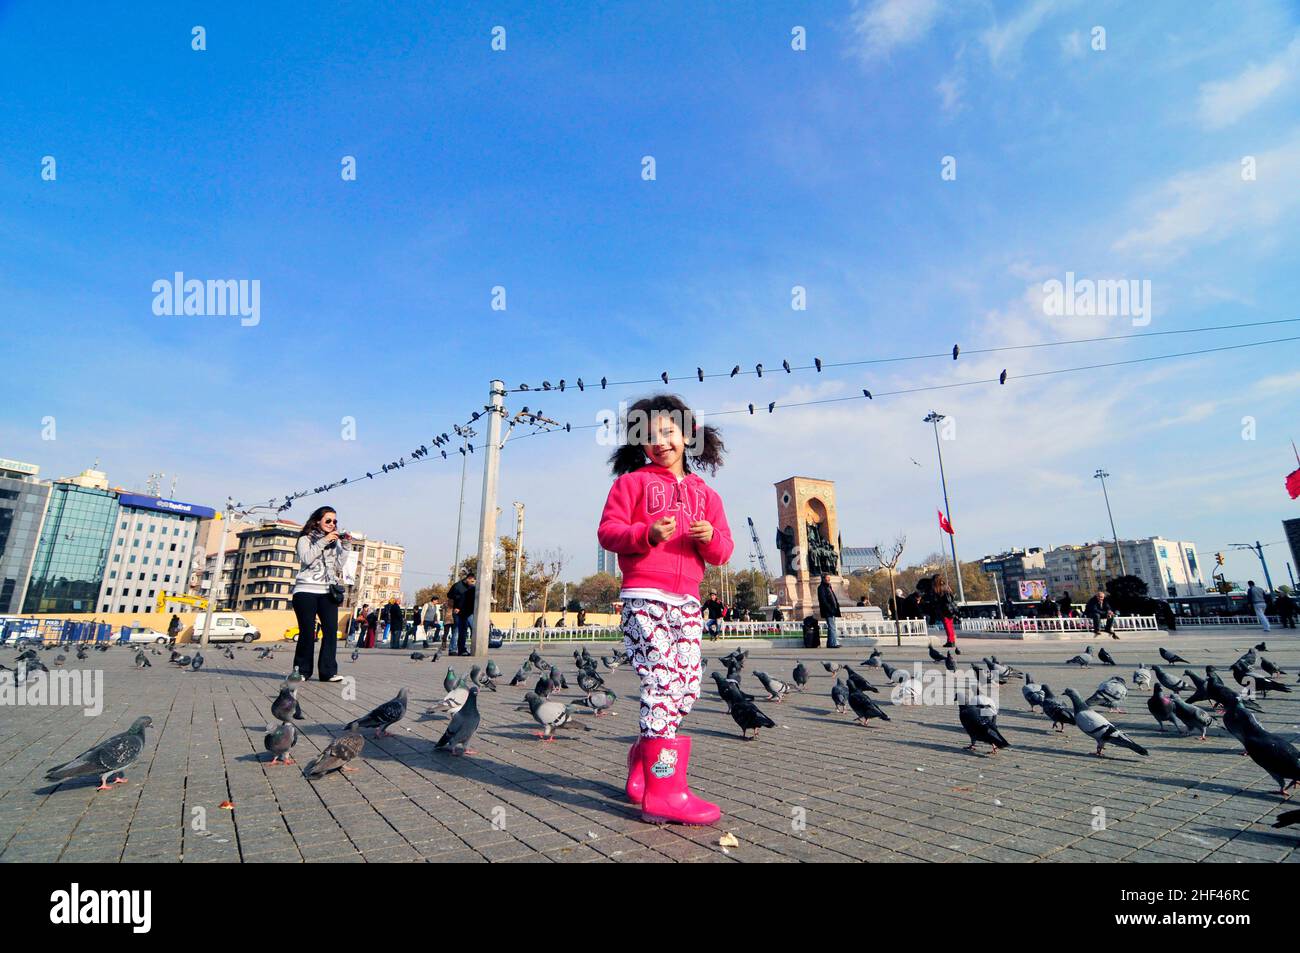 A Turkish girl running and playing between the pigeons in Taksim square in Istanbul, Turkey. Stock Photo